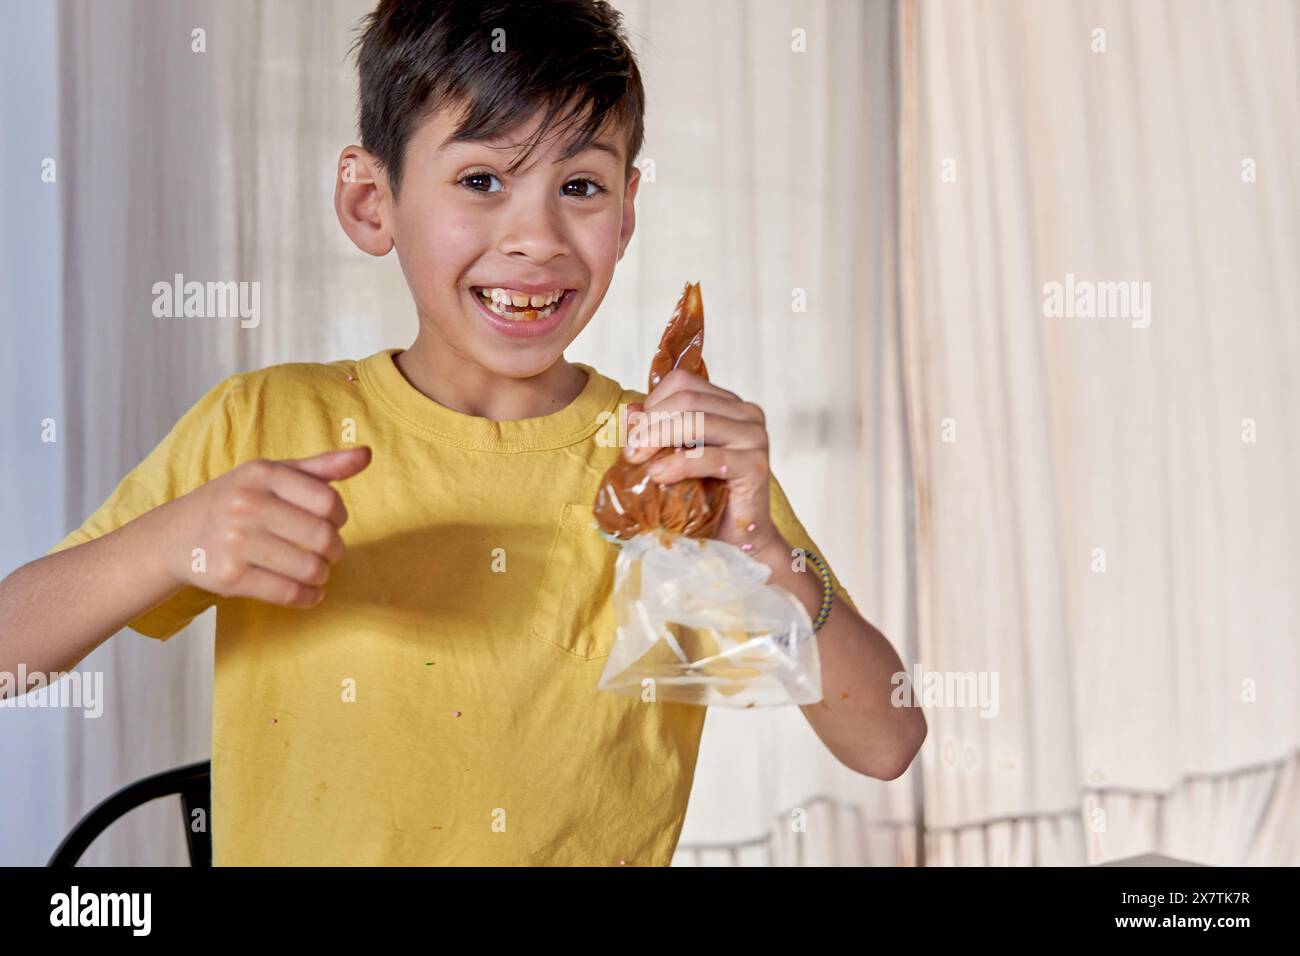 Latin boy smiling with a pastry bag with dulce de leche in one hand and making ok with the other. Concept of a little cook Stock Photo